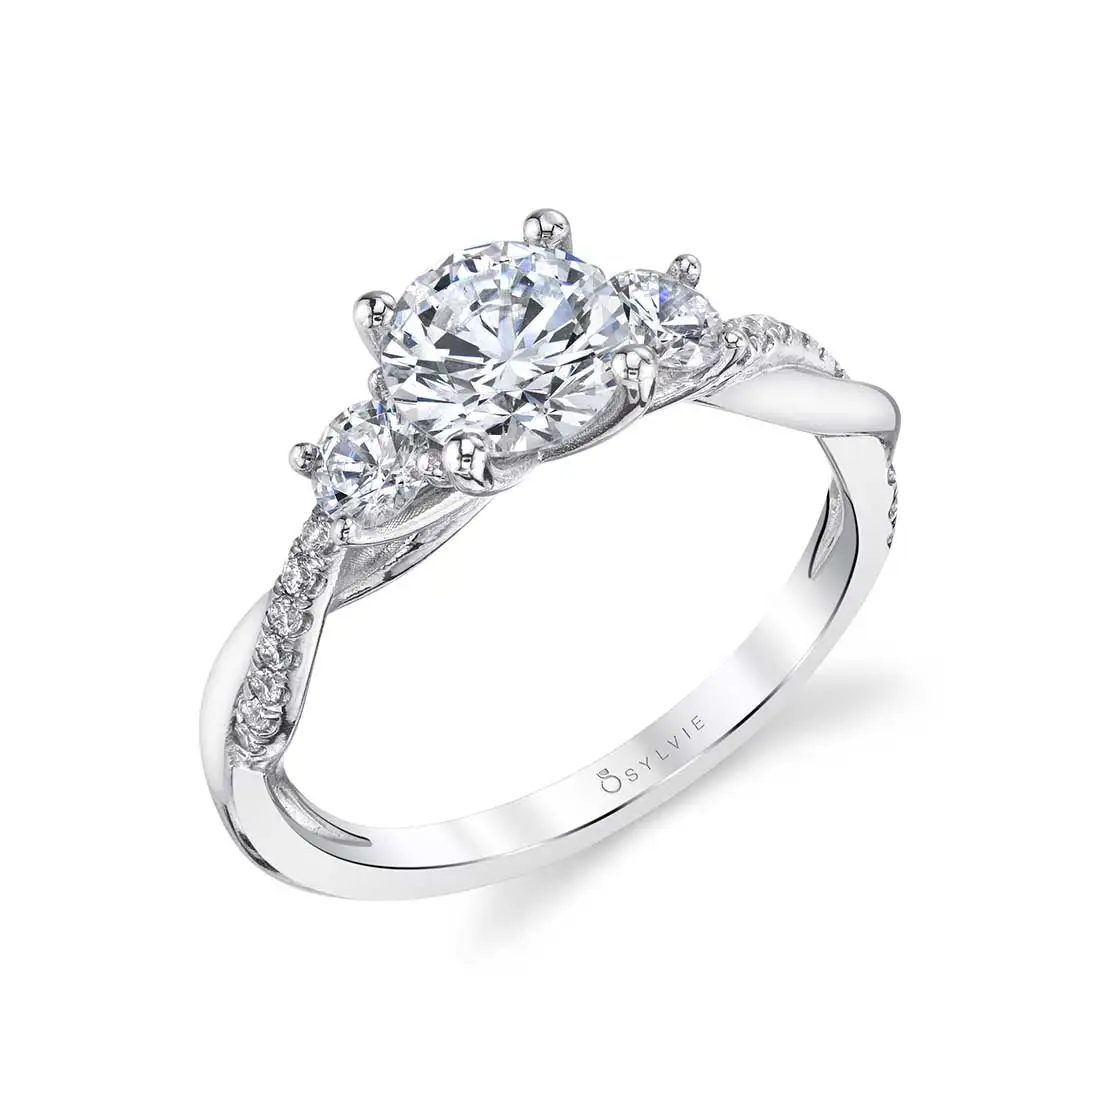 Side view of a 3 Stone Engagement Ring with Spiral Band - Evangeline - S